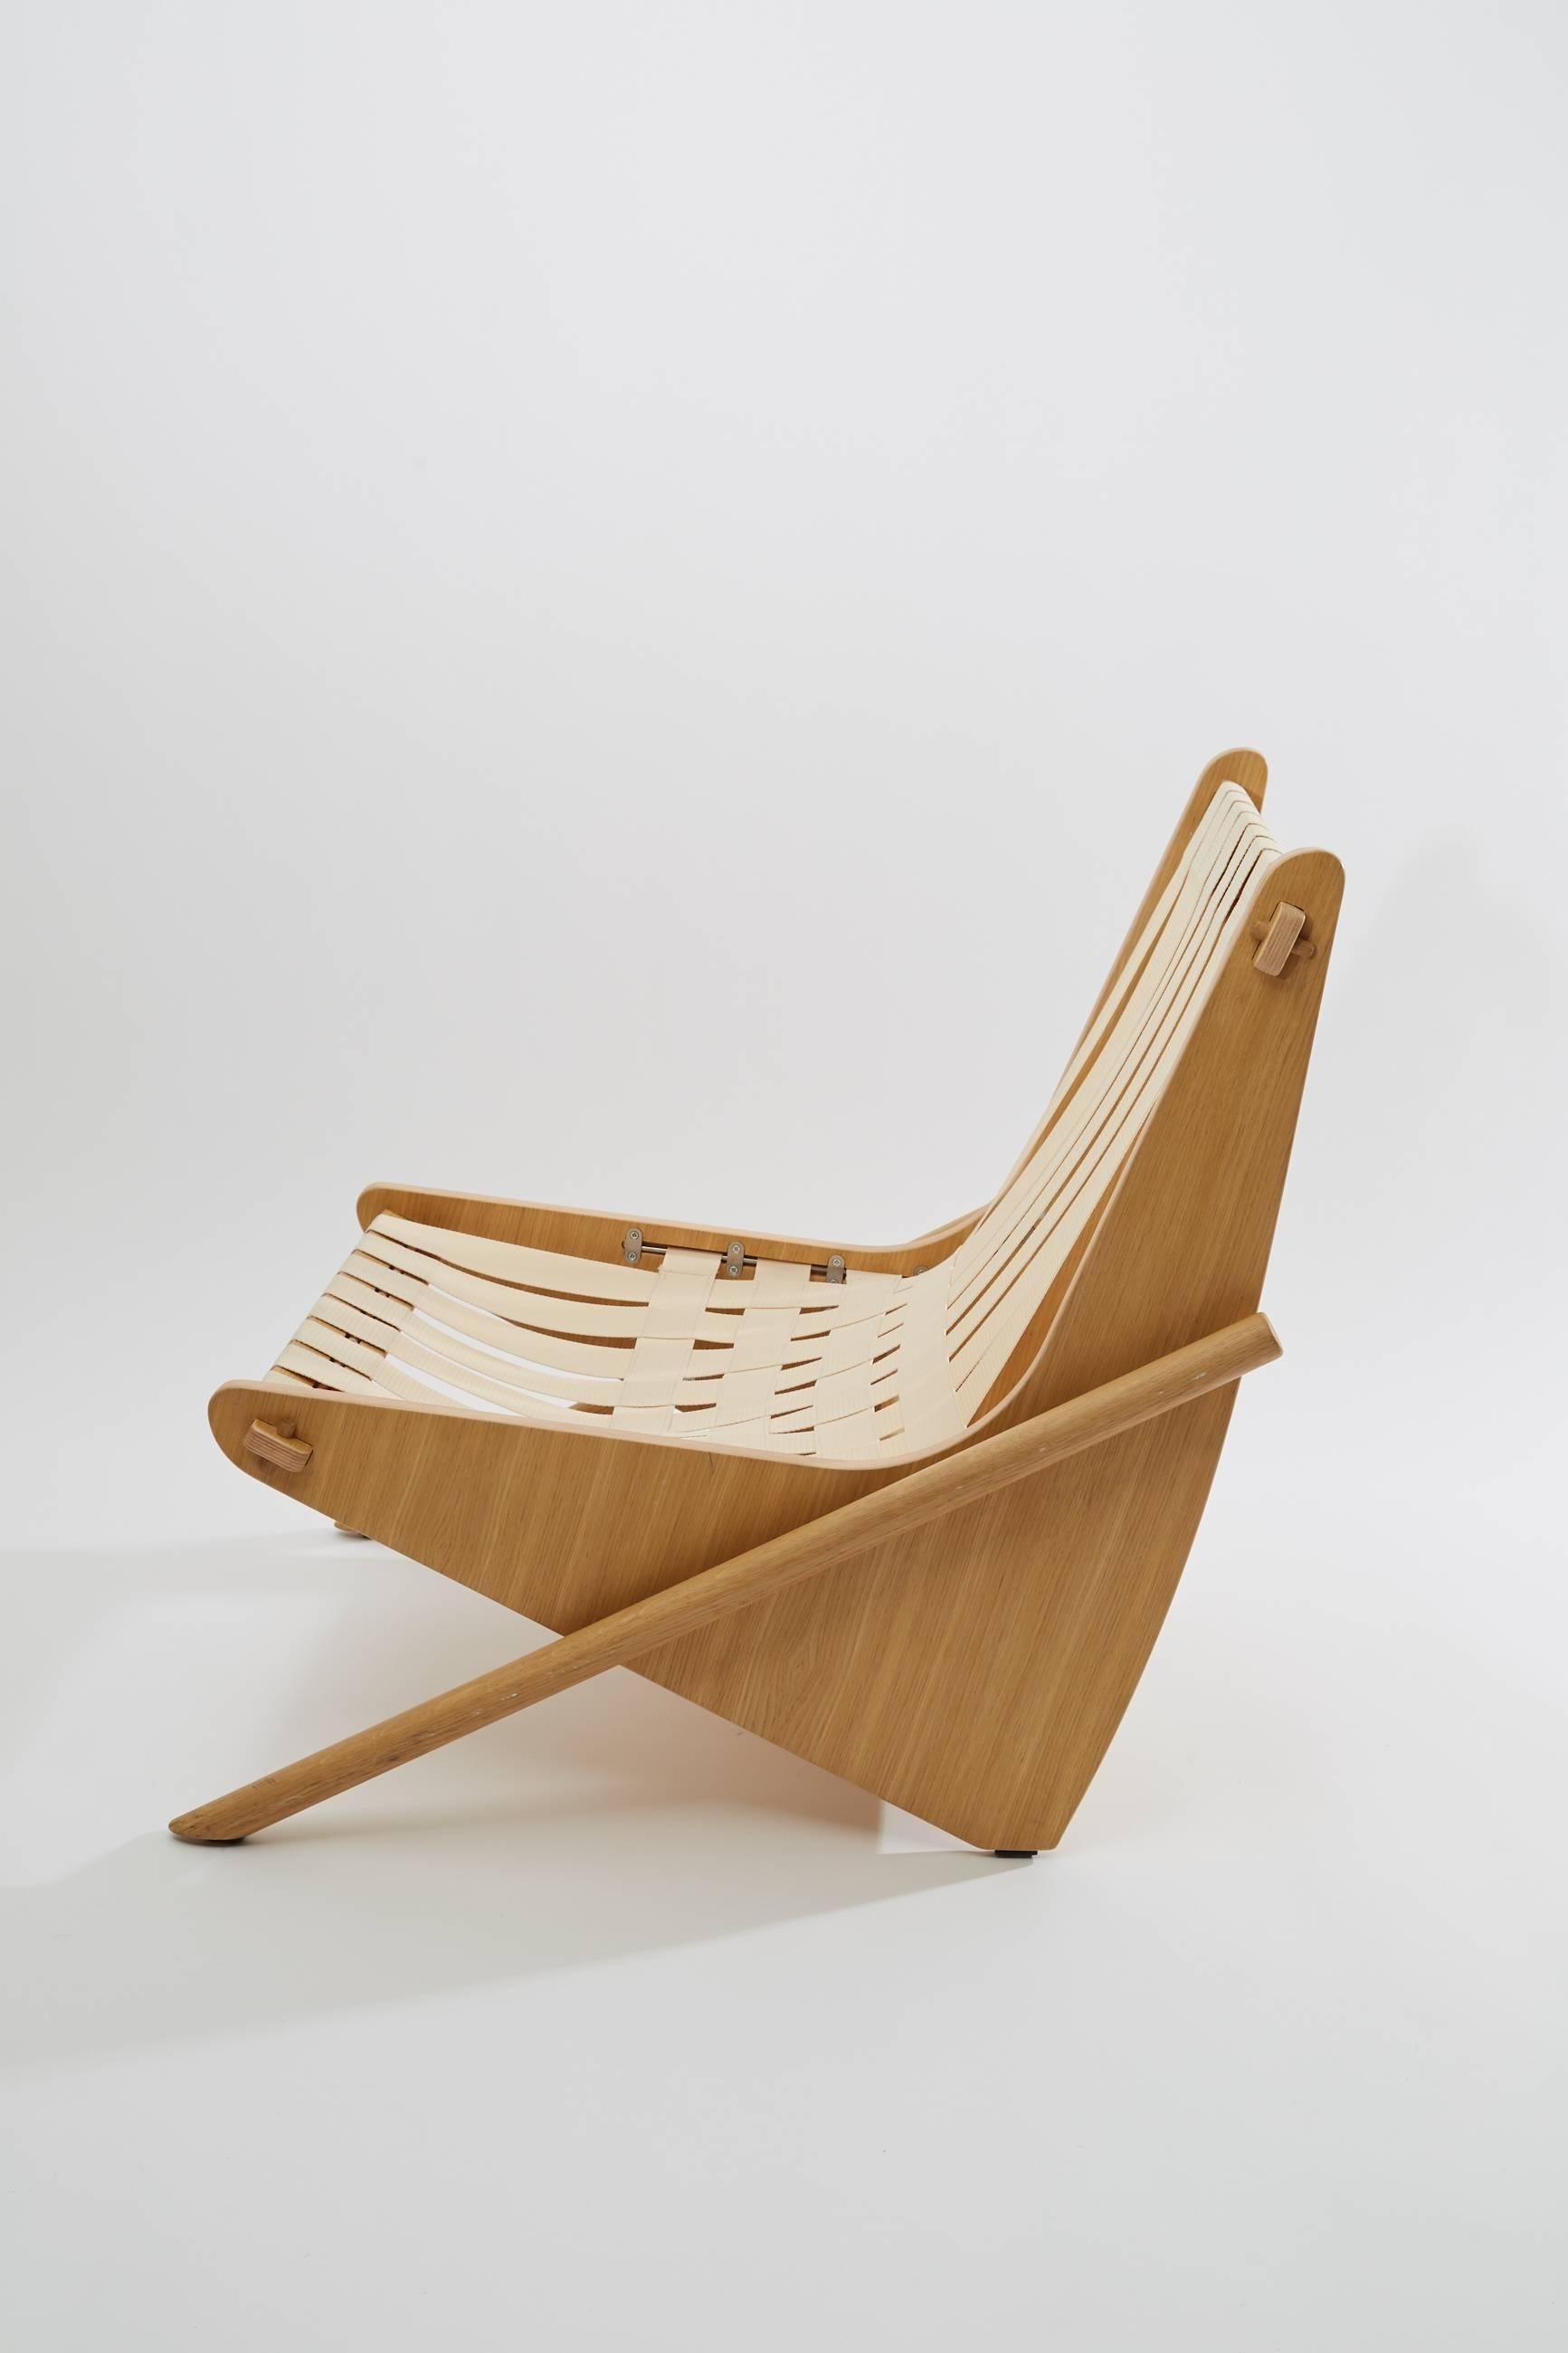 Boomerang chair design by Richard Neutra in 1942.

Structure in plywood.
Seat and back in Yarn.
Black seat and backrest cushions included. Color upon request.

In the early 1940s, Richard Neutra designed beautiful, functional furniture for the